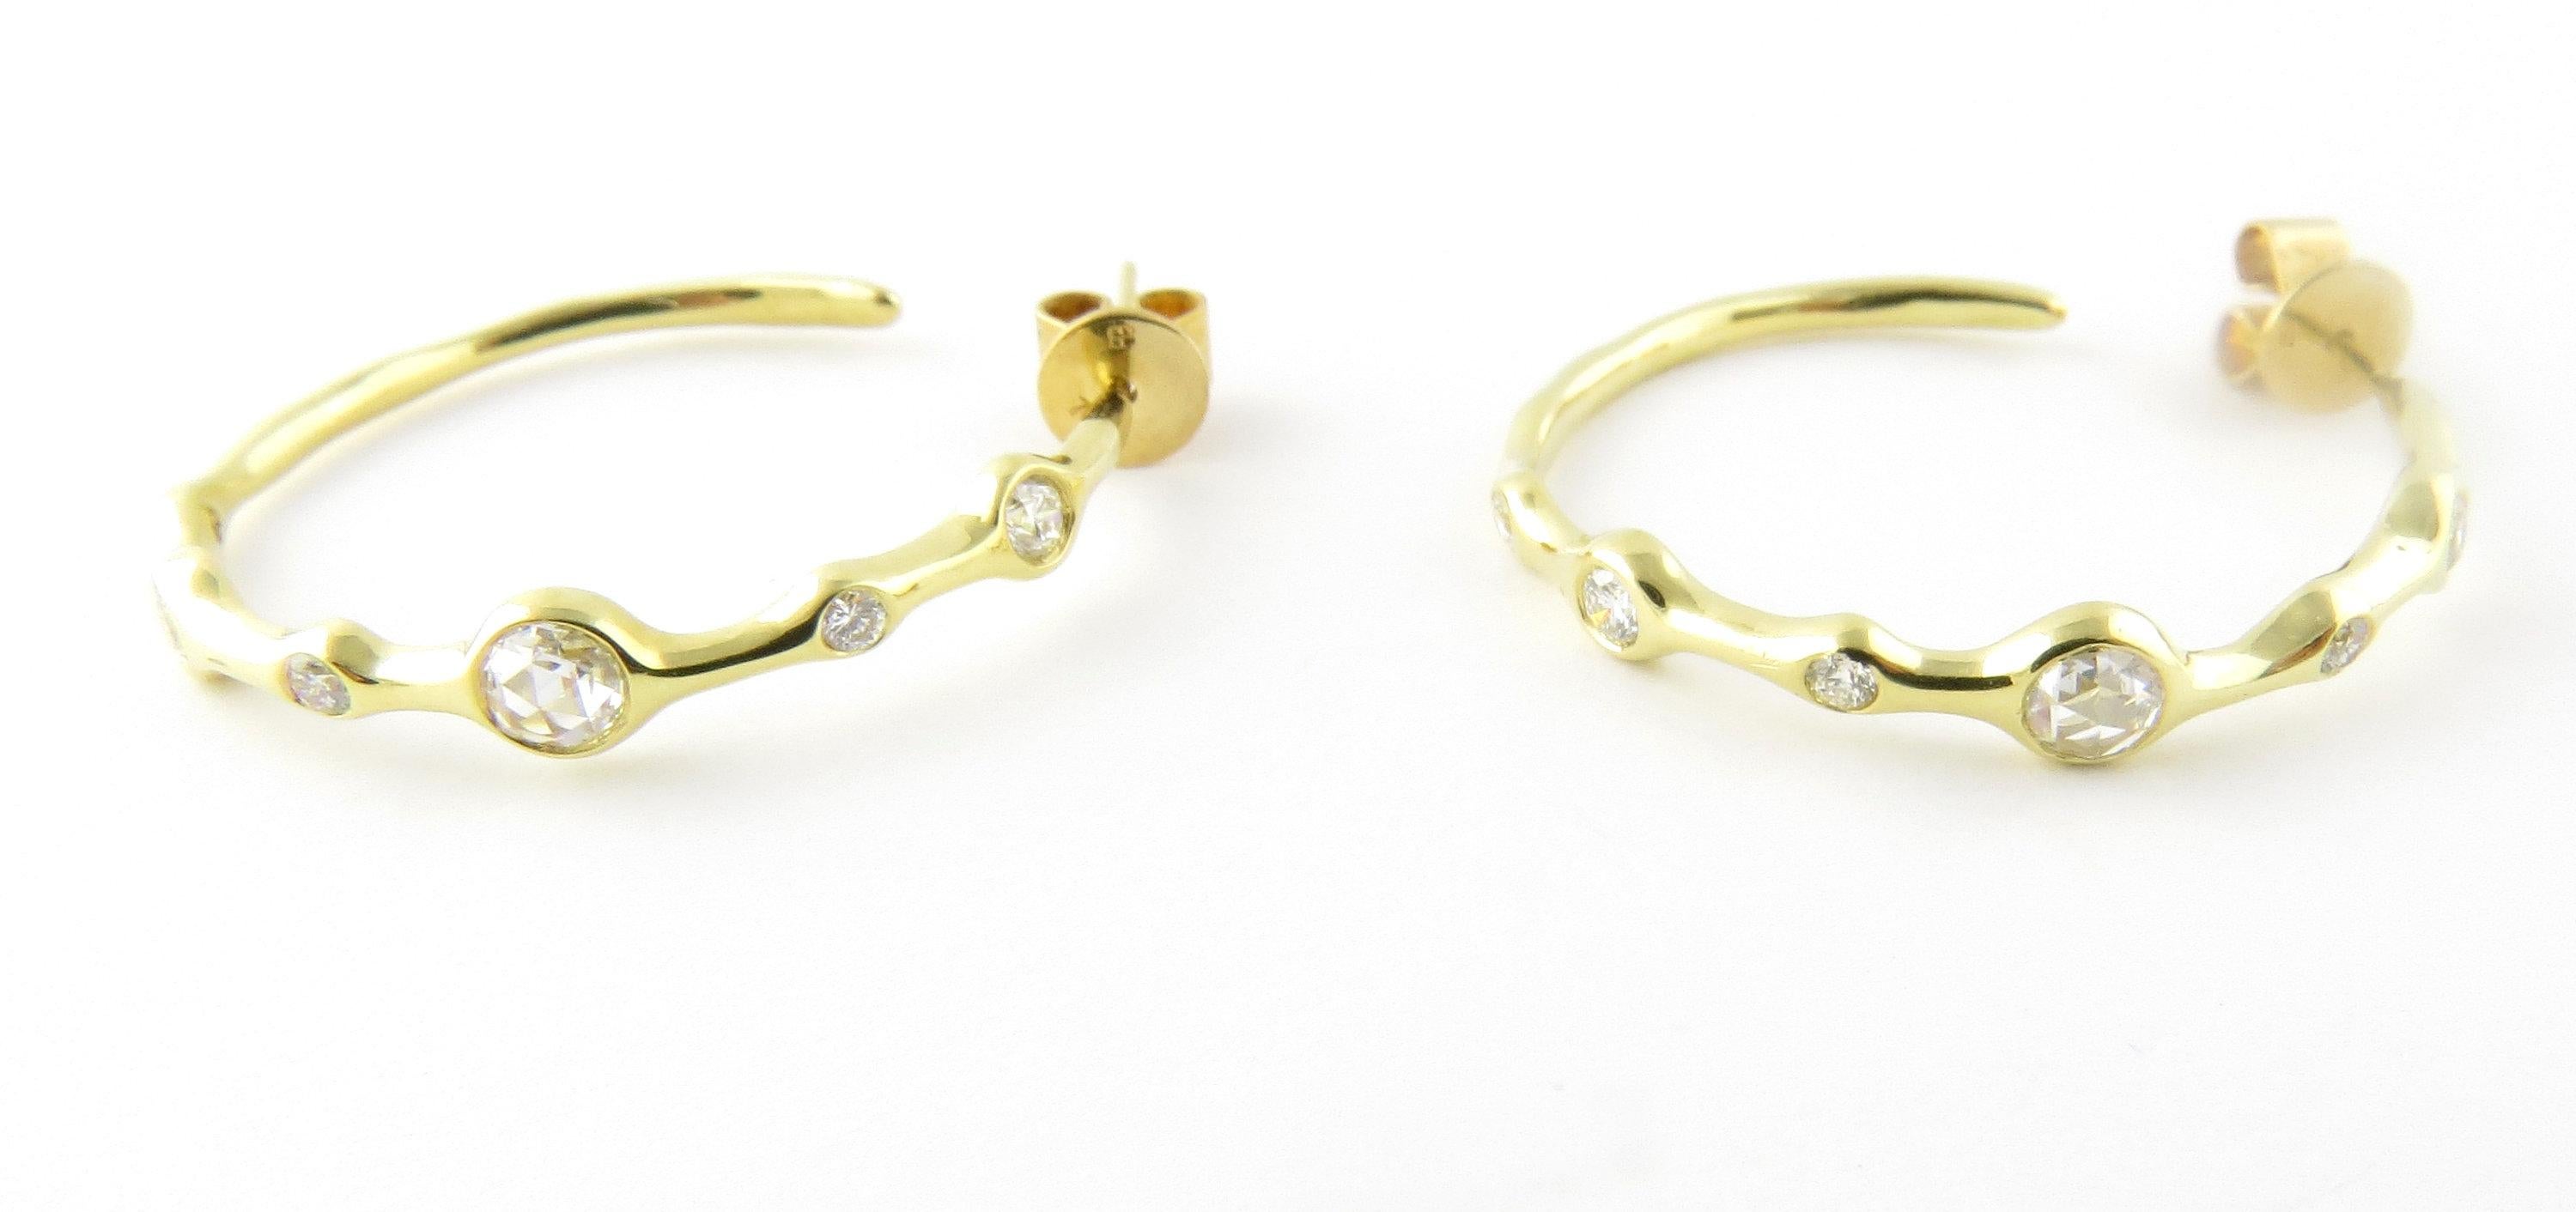 Vintage 18 Karat Yellow Gold and Diamond Hoop Earrings- 
These dazzling earrings each feature six round brilliant cut diamonds (.41 ct. each earring) set in beautifully detailed 18K yellow gold. Push back closures. 
Approximate total diamond weight: